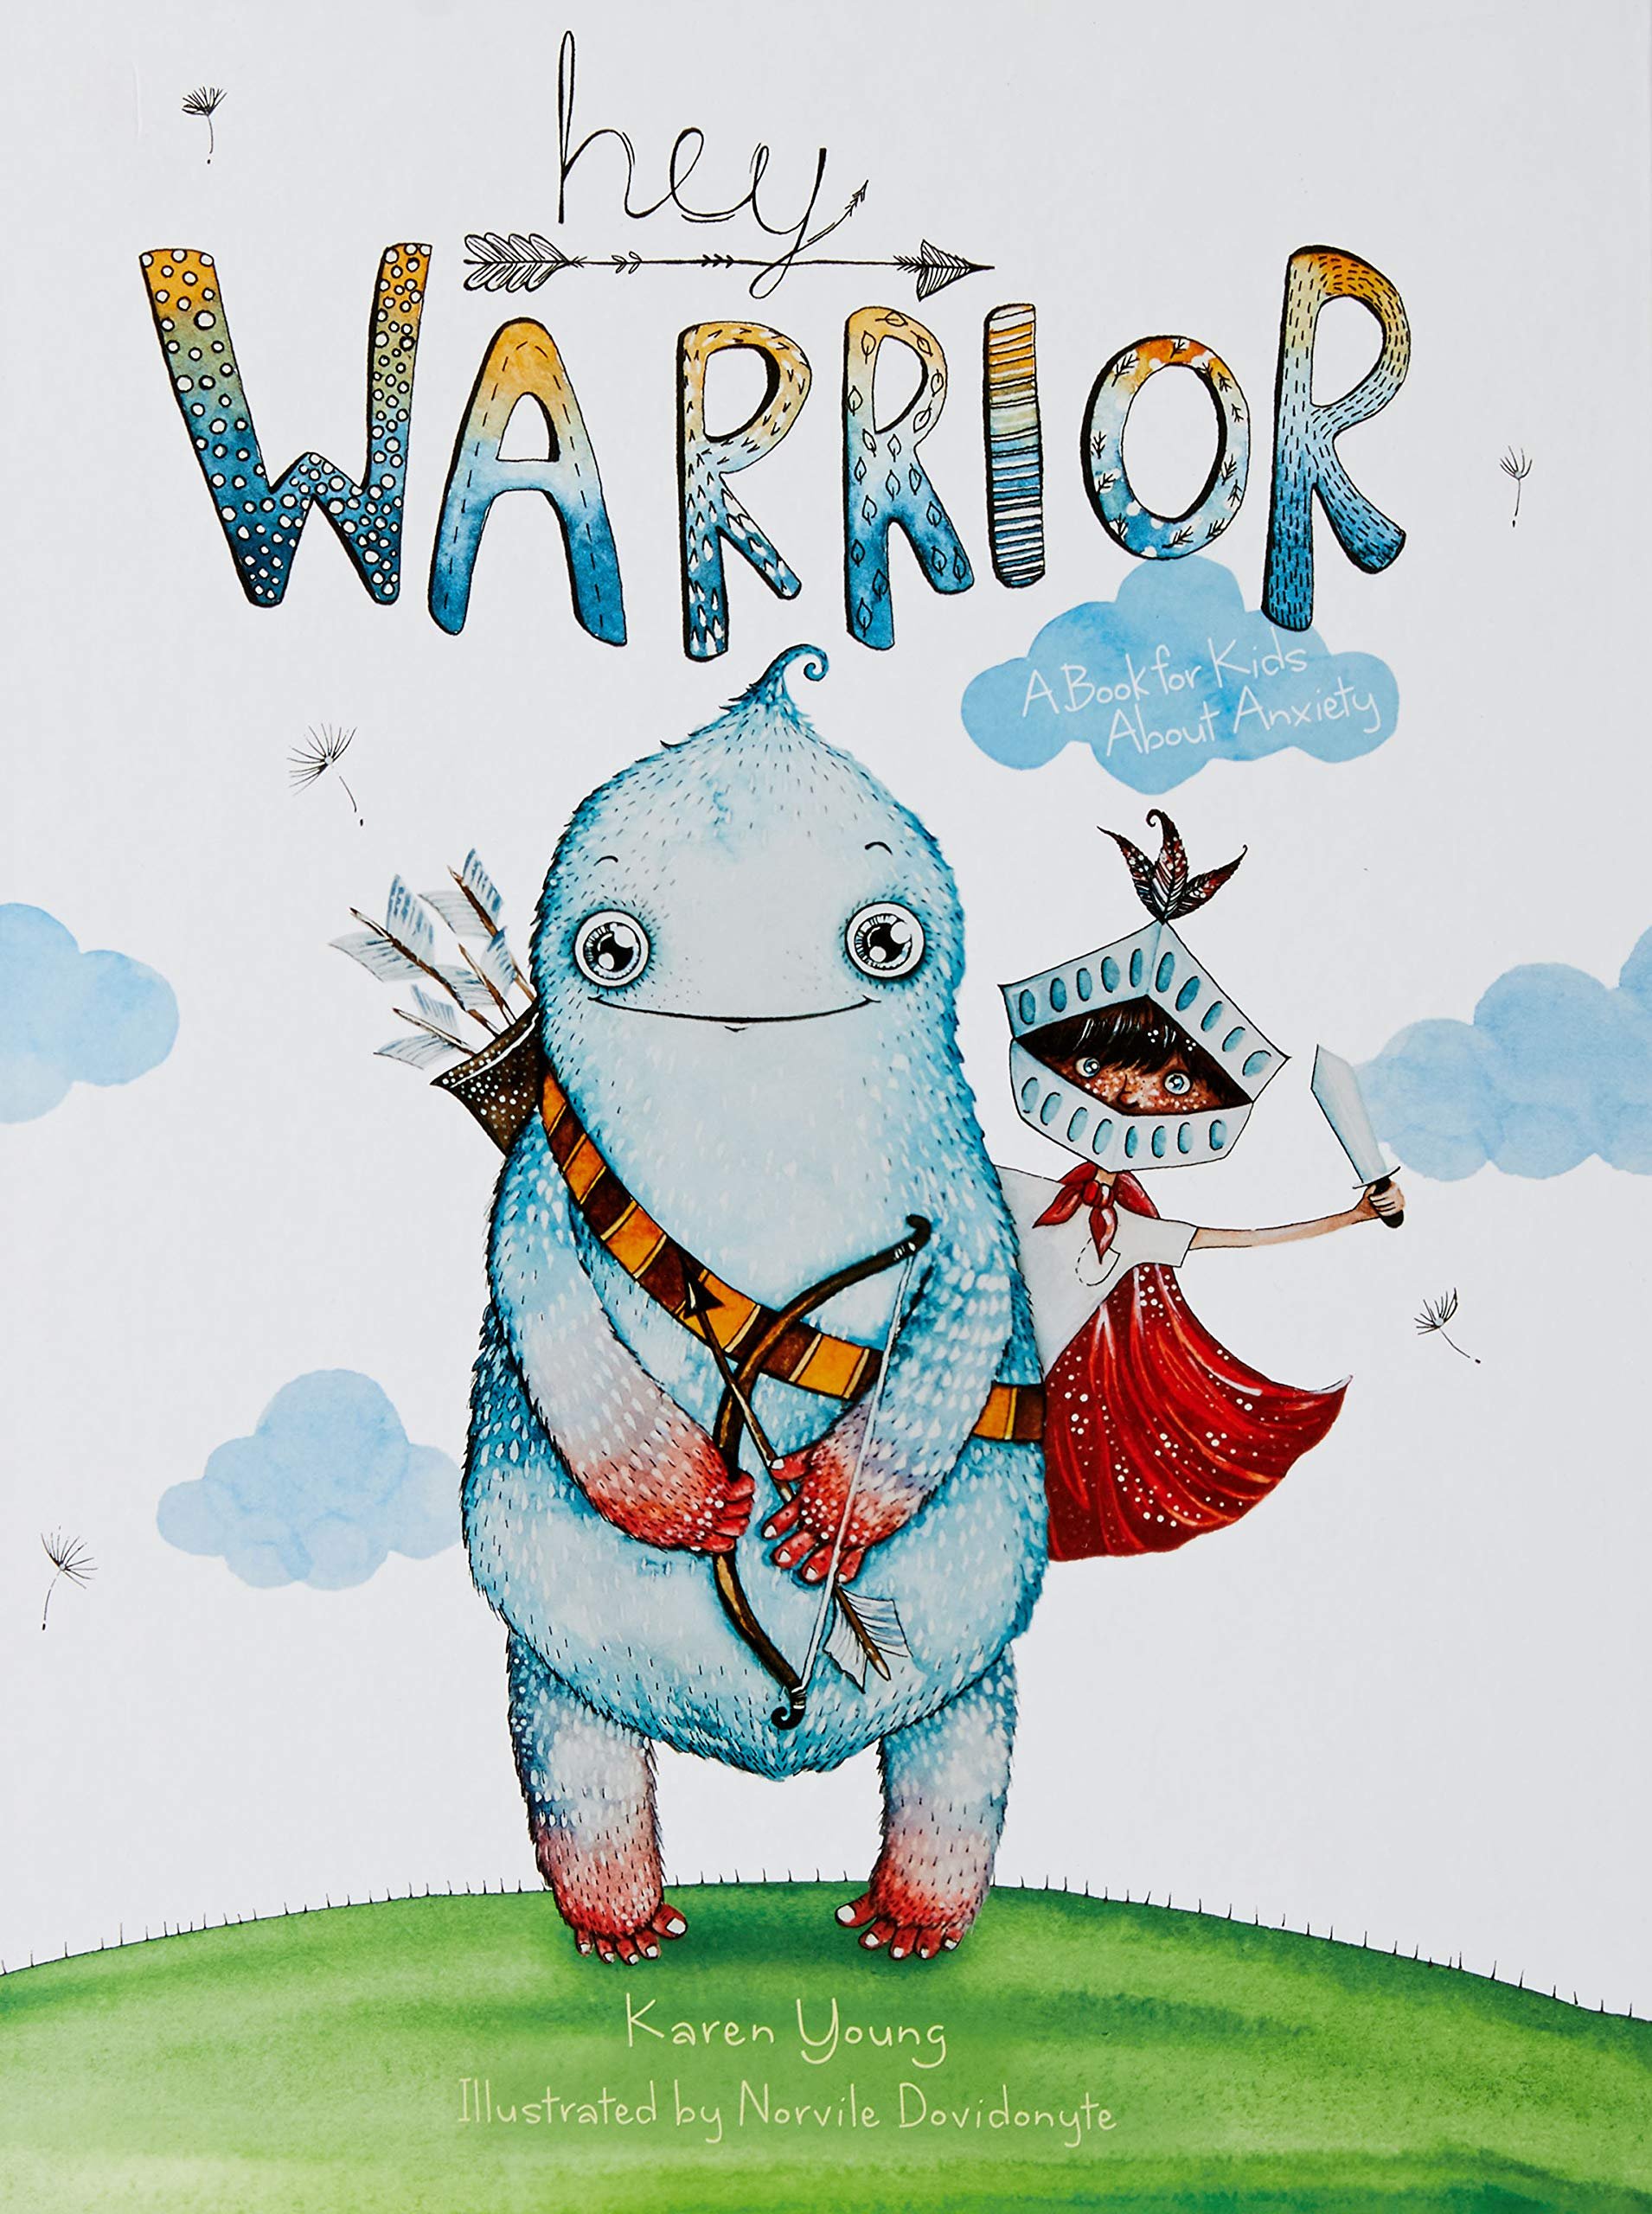 Hey Warrior: A Book for Kids About Anxiety